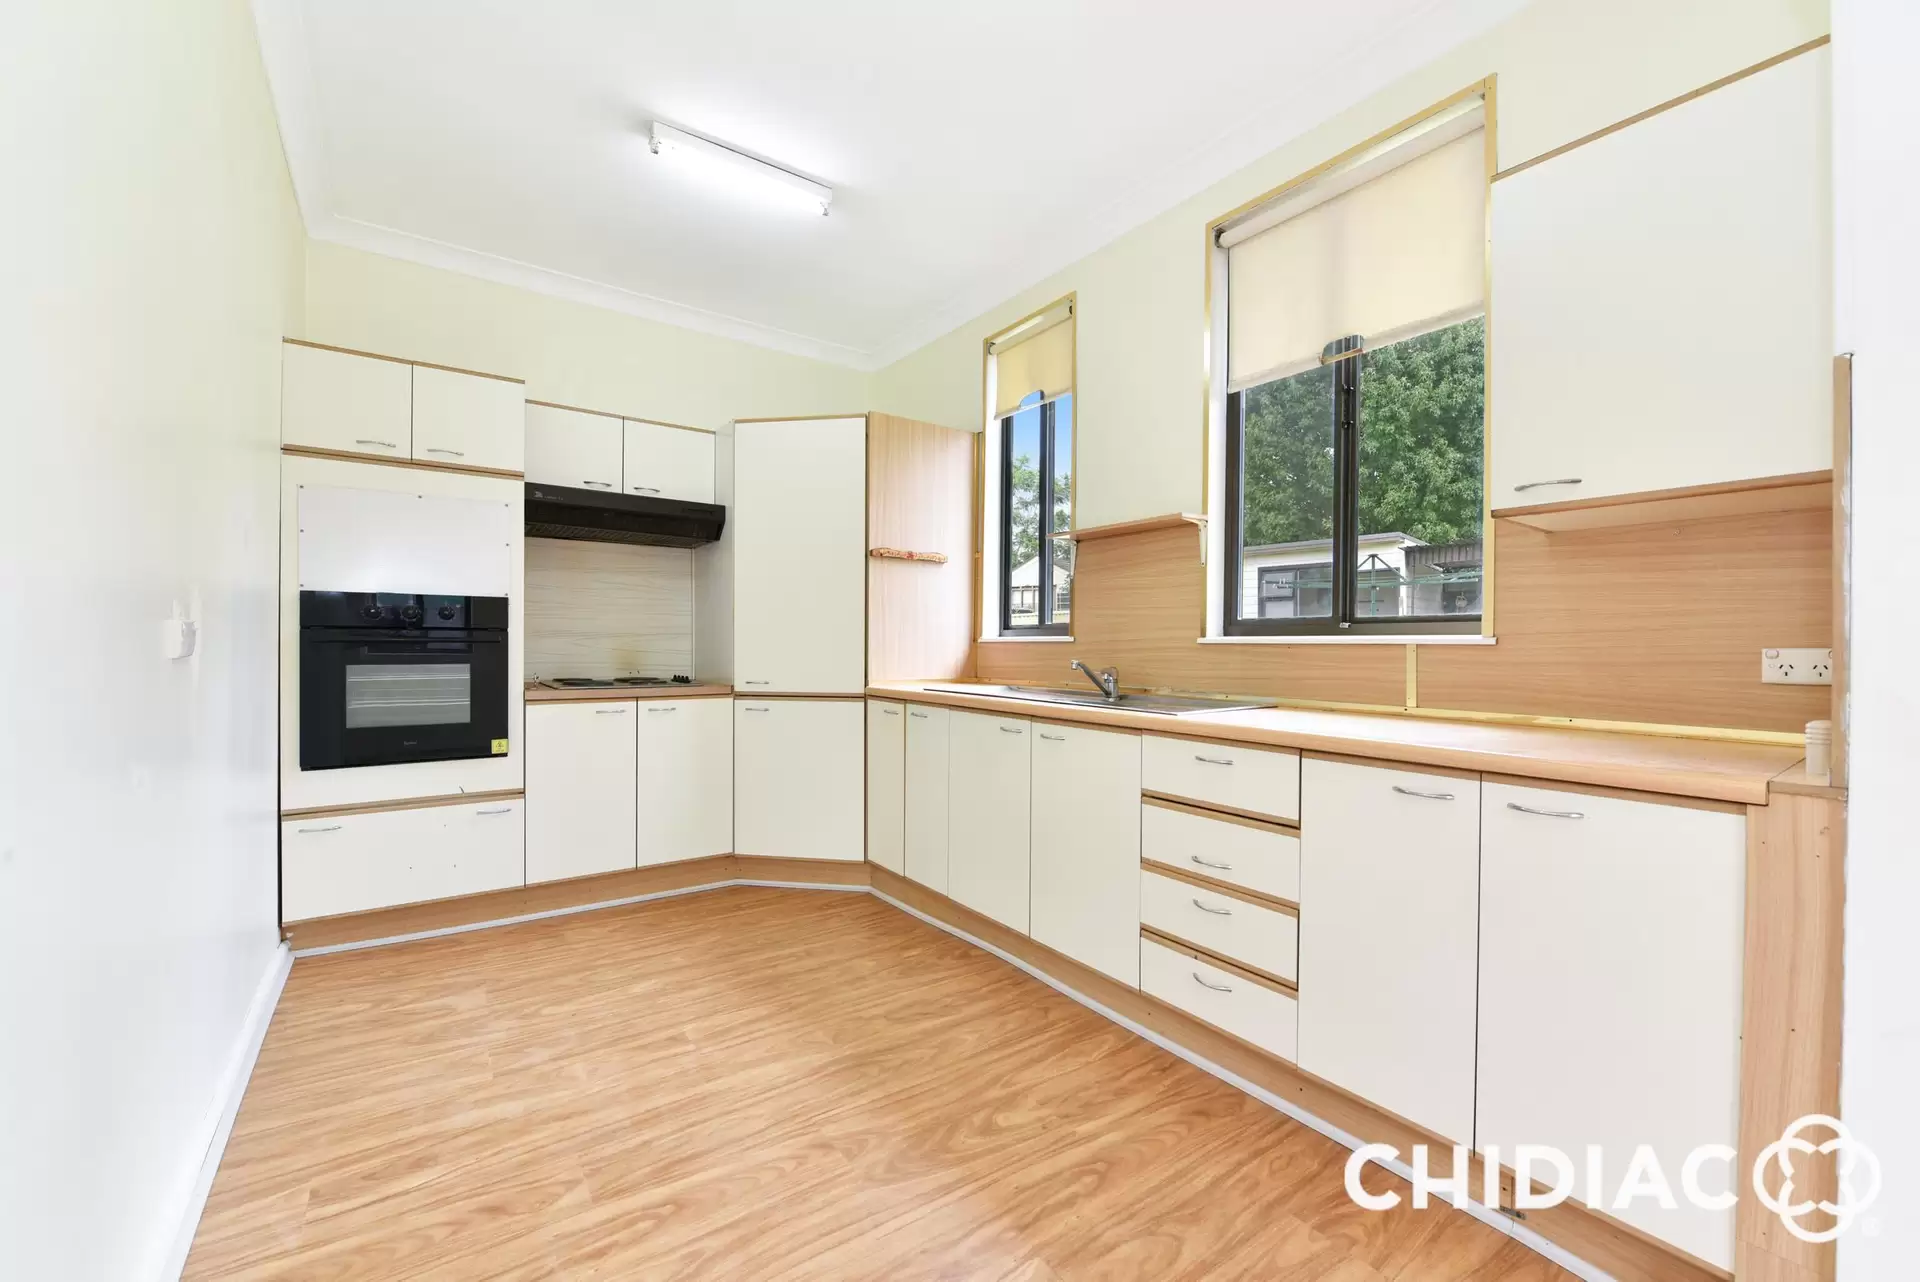 17 Gilmore Road, Lalor Park Leased by Chidiac Realty - image 1